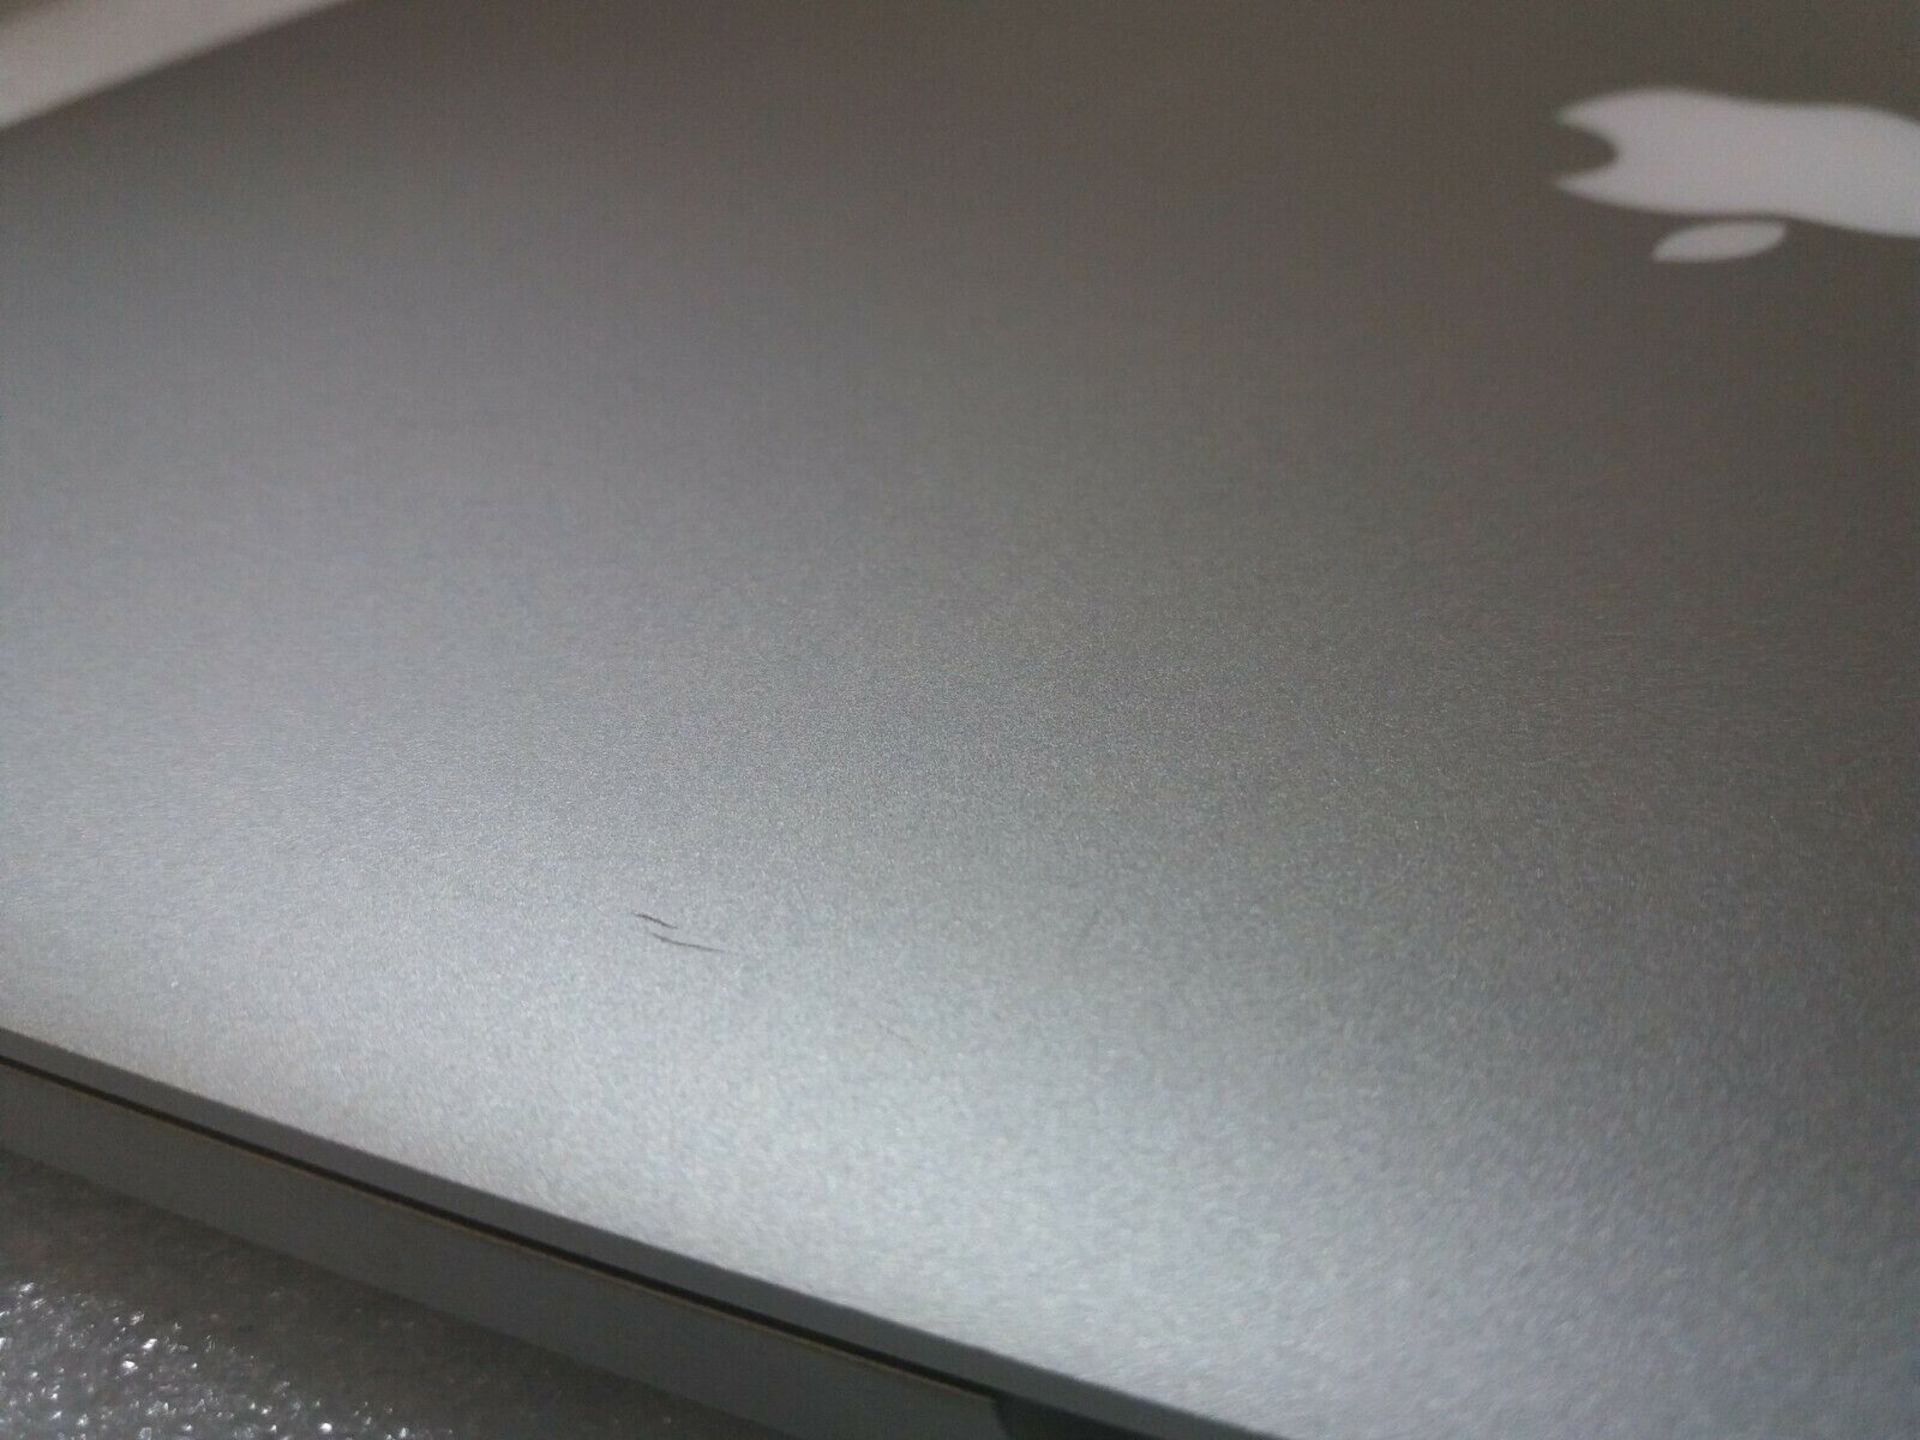 APPLE MACBOOK PRO A1502, 13.3", 2.6GHZ, i5 PROCESSOR, 8GB RAM, 251GB SSD, (DELIVERY ONLY AT £10 PLUS - Image 5 of 5